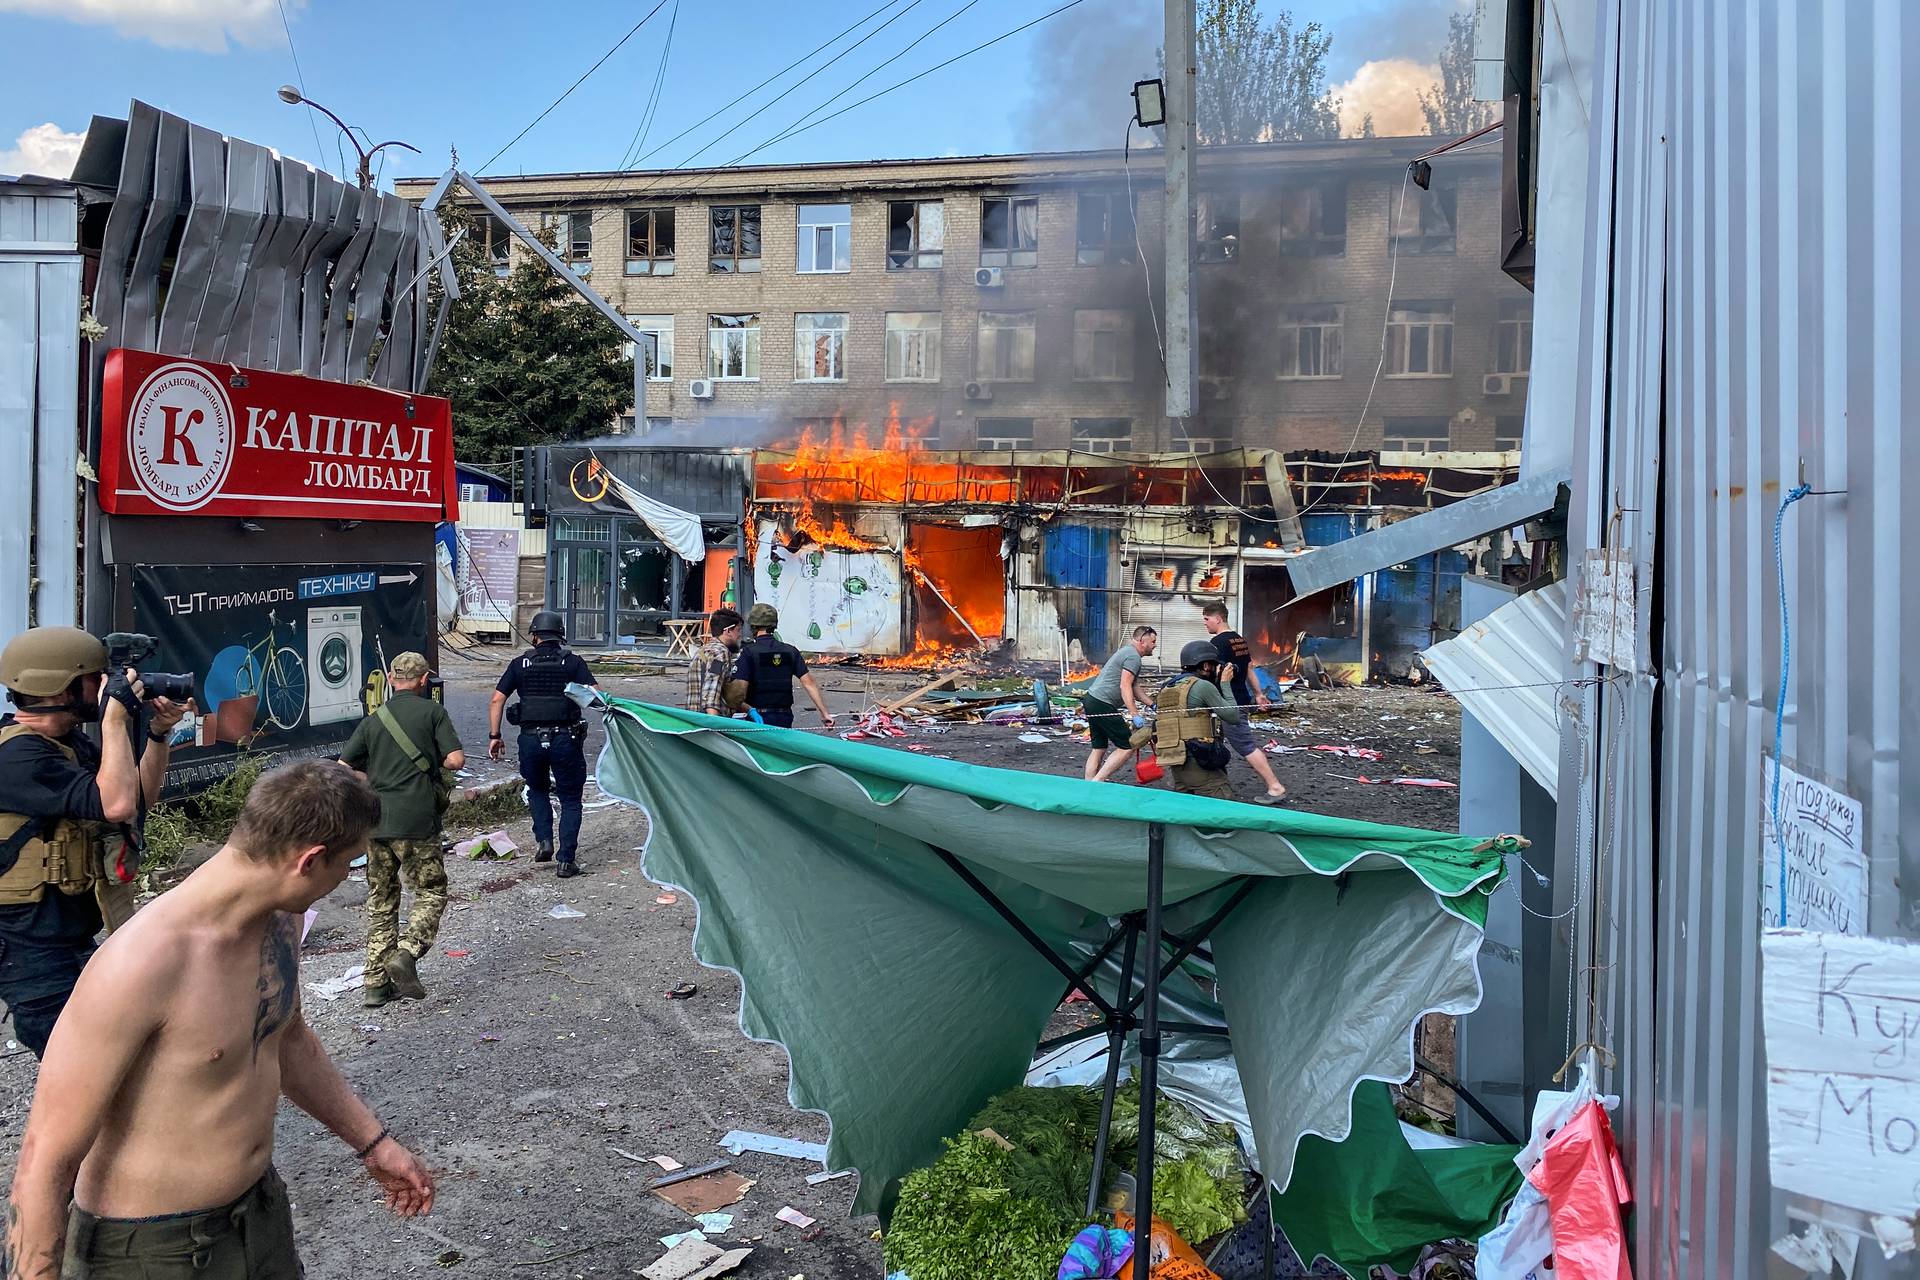 Firefighters extinguish a blaze that broke out in the market in Kostiantynivka after the missile strike